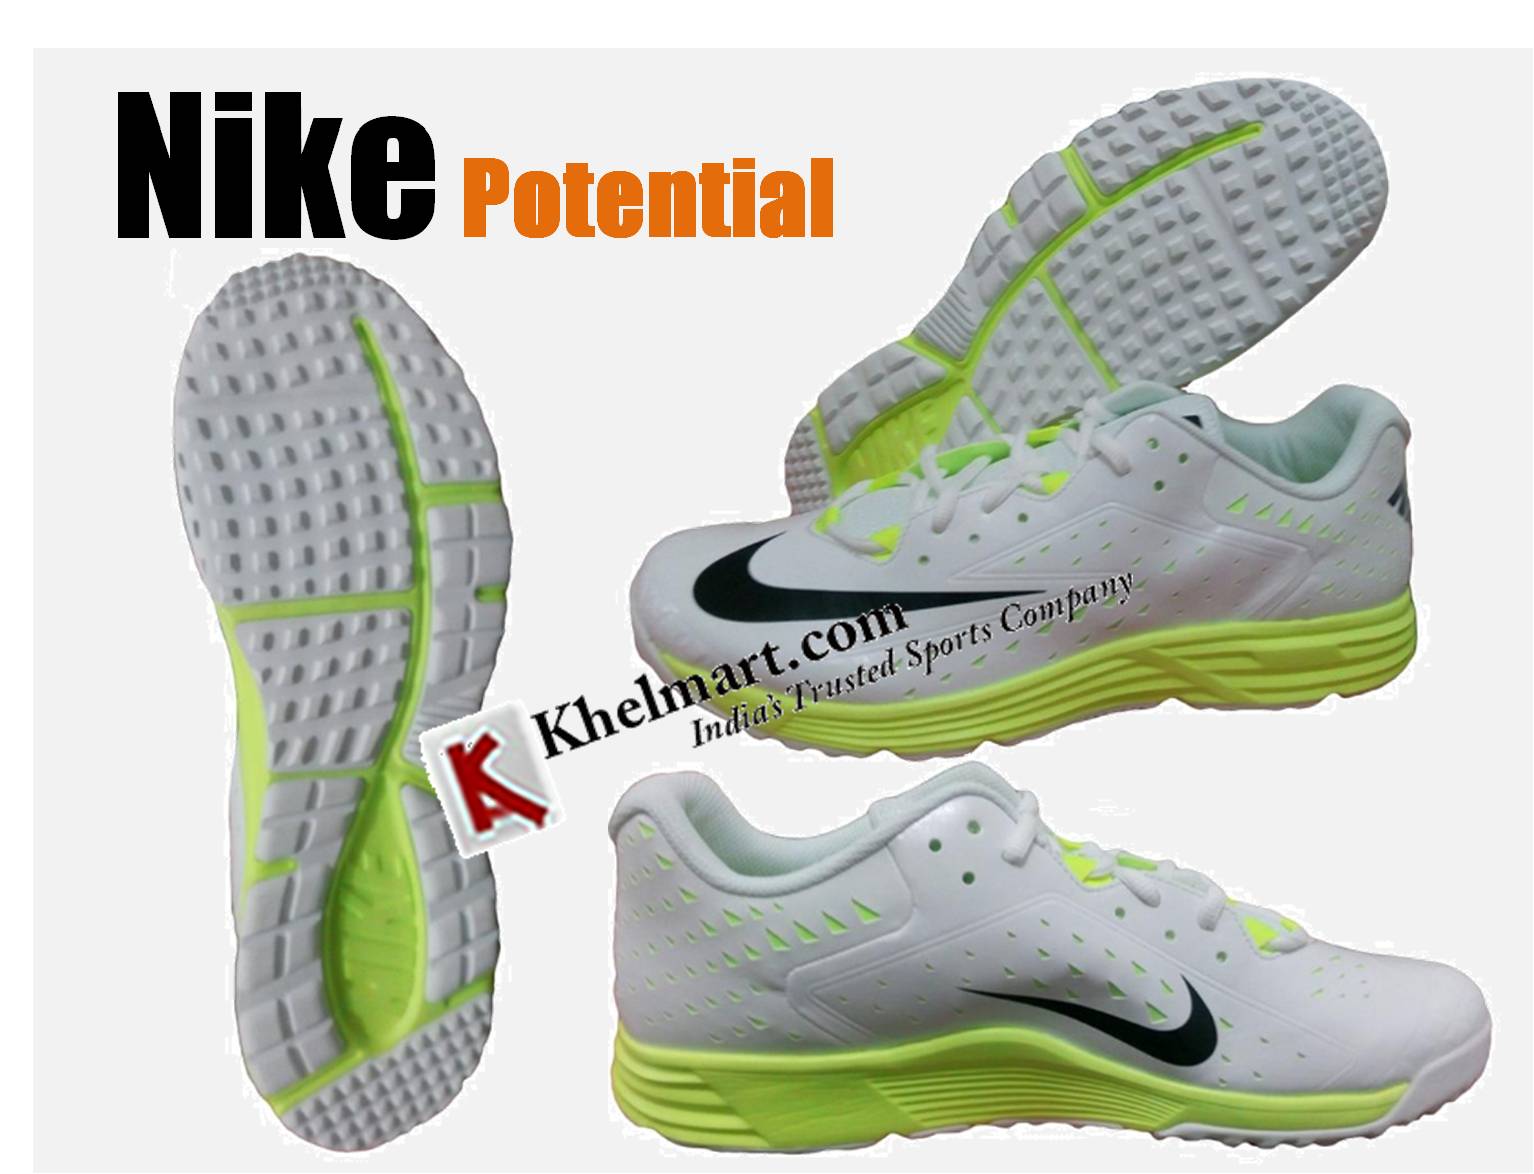 NIKE_POTENTIAL_CRICKET_SHOES.jpg 